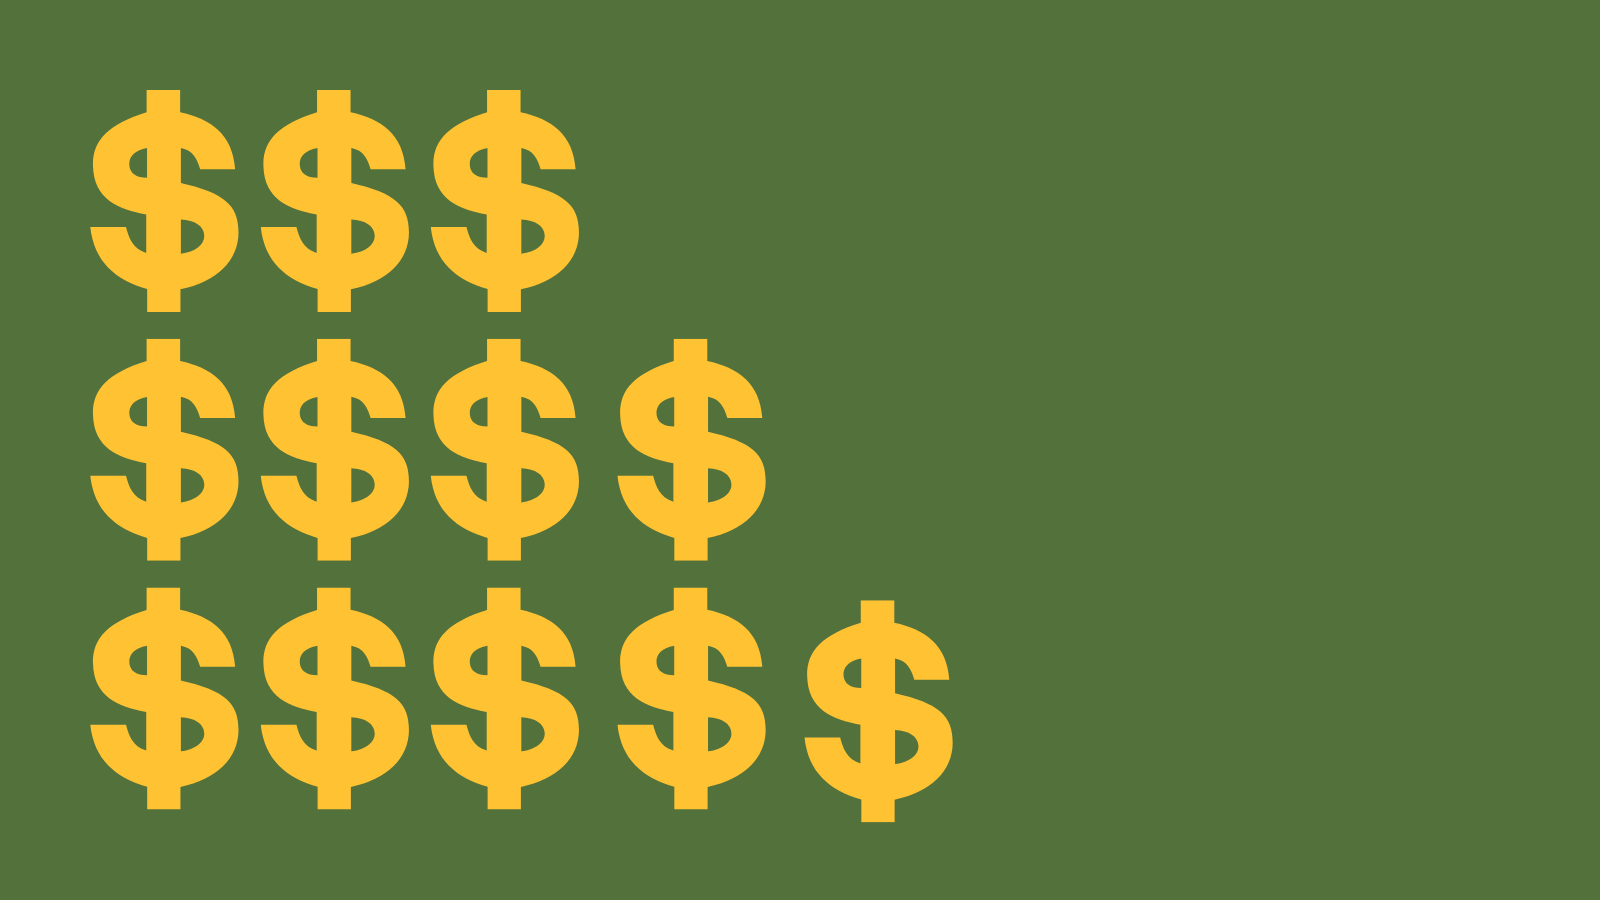 Yellow Dollar Signs, green background